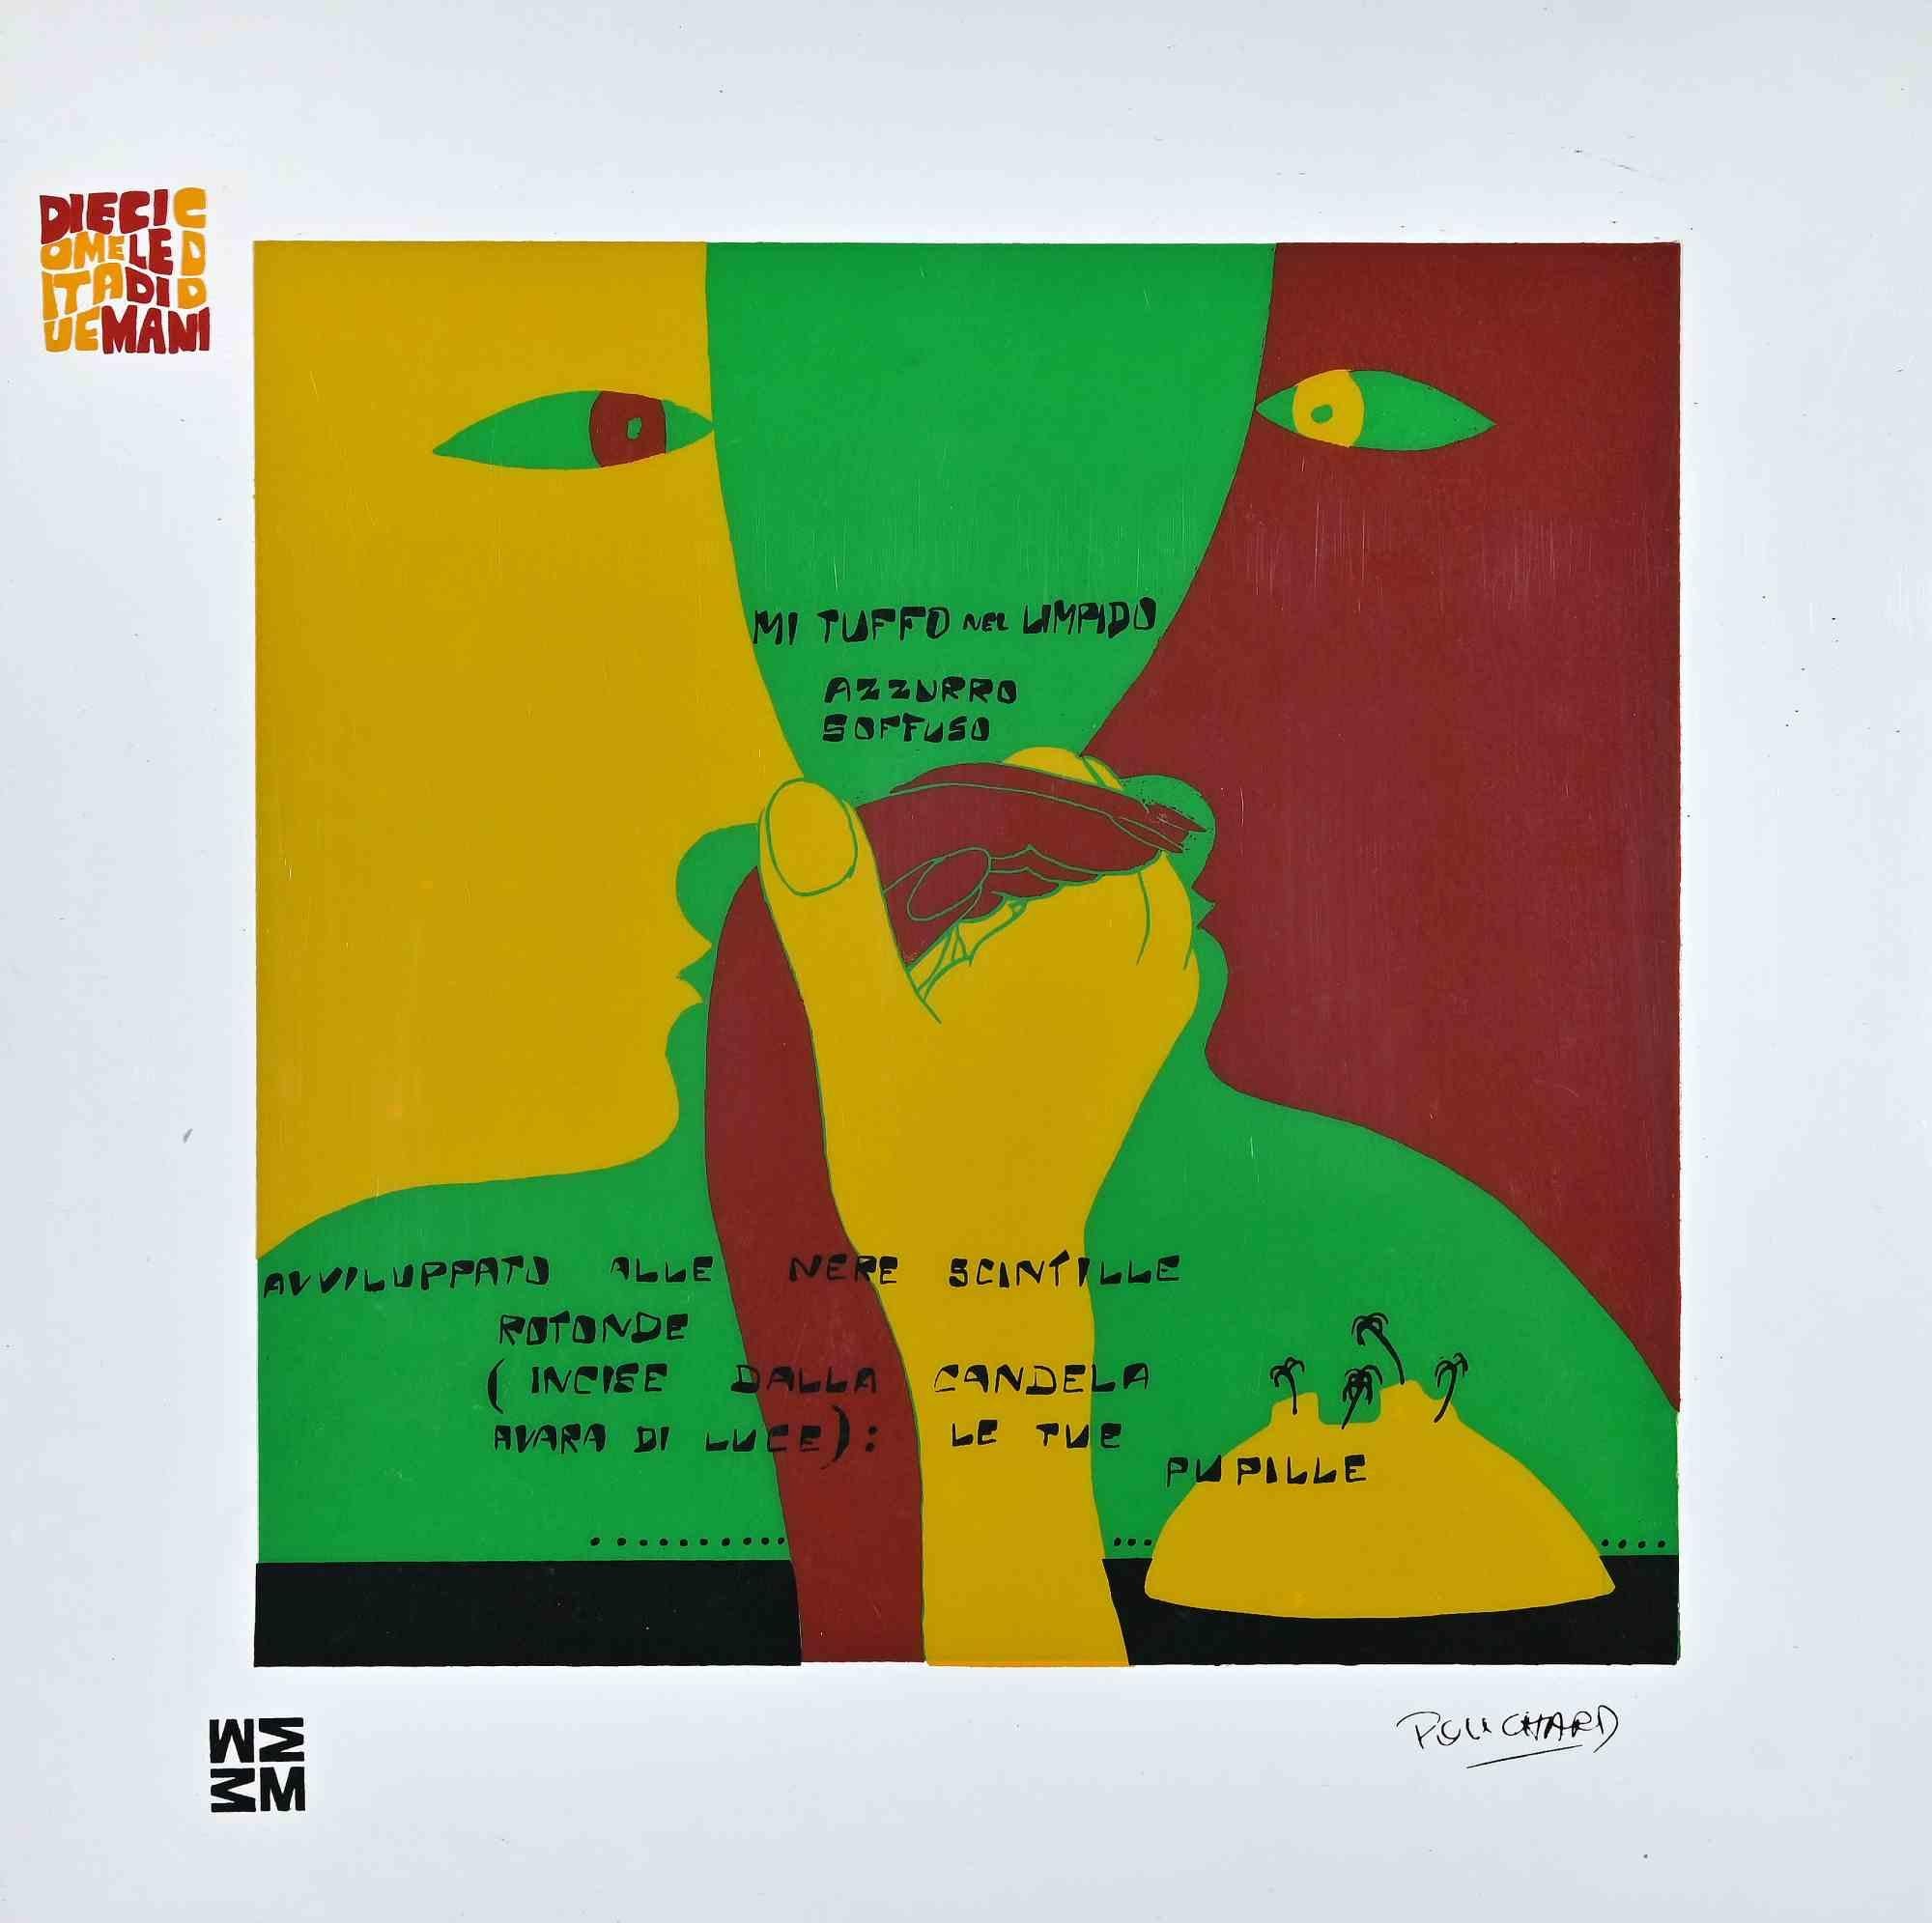 Azzurro soffuso - Diecicomeleditadiduemani is a color silk-screen print on acetates, realized in  1973  by the artist  Ennio Pouchard  (1928).

Signed on plate  on the lower right.

From the porfolio " Diecicomeleditadiduemani ", containing 10